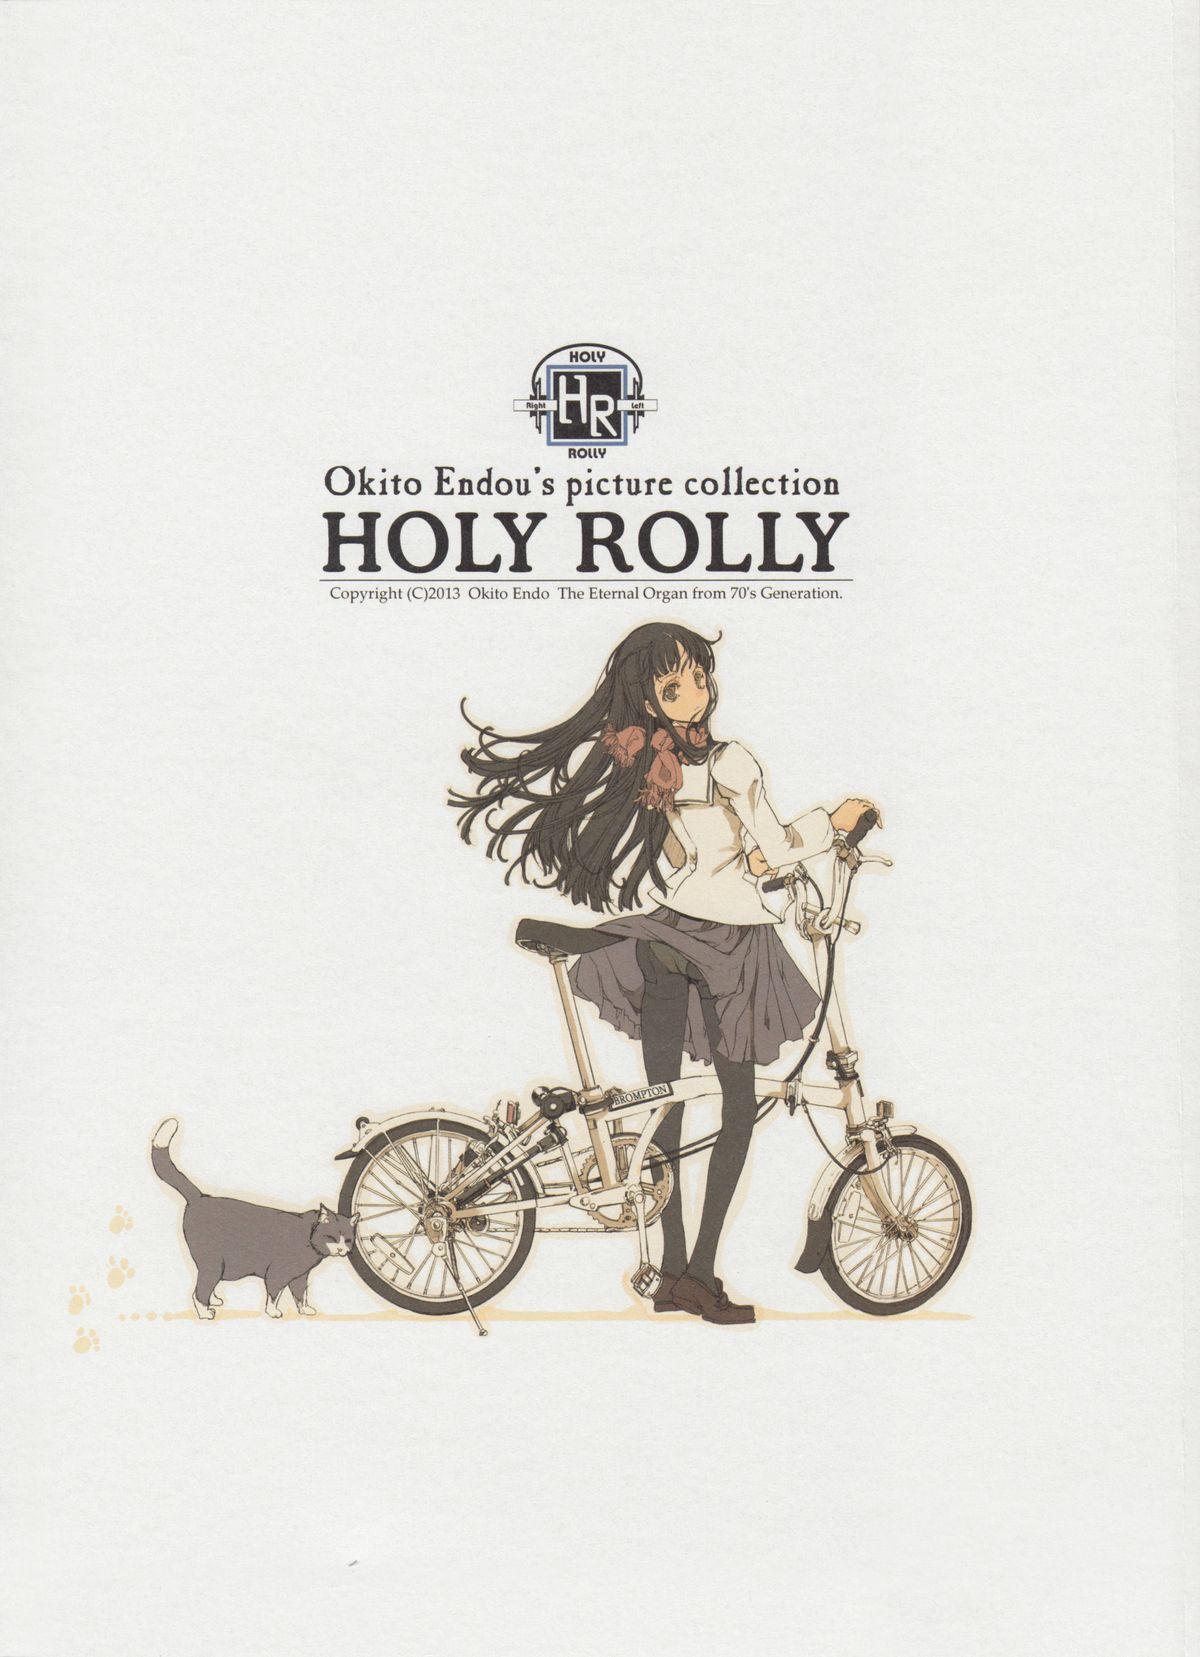 HOLY ROLLY 1